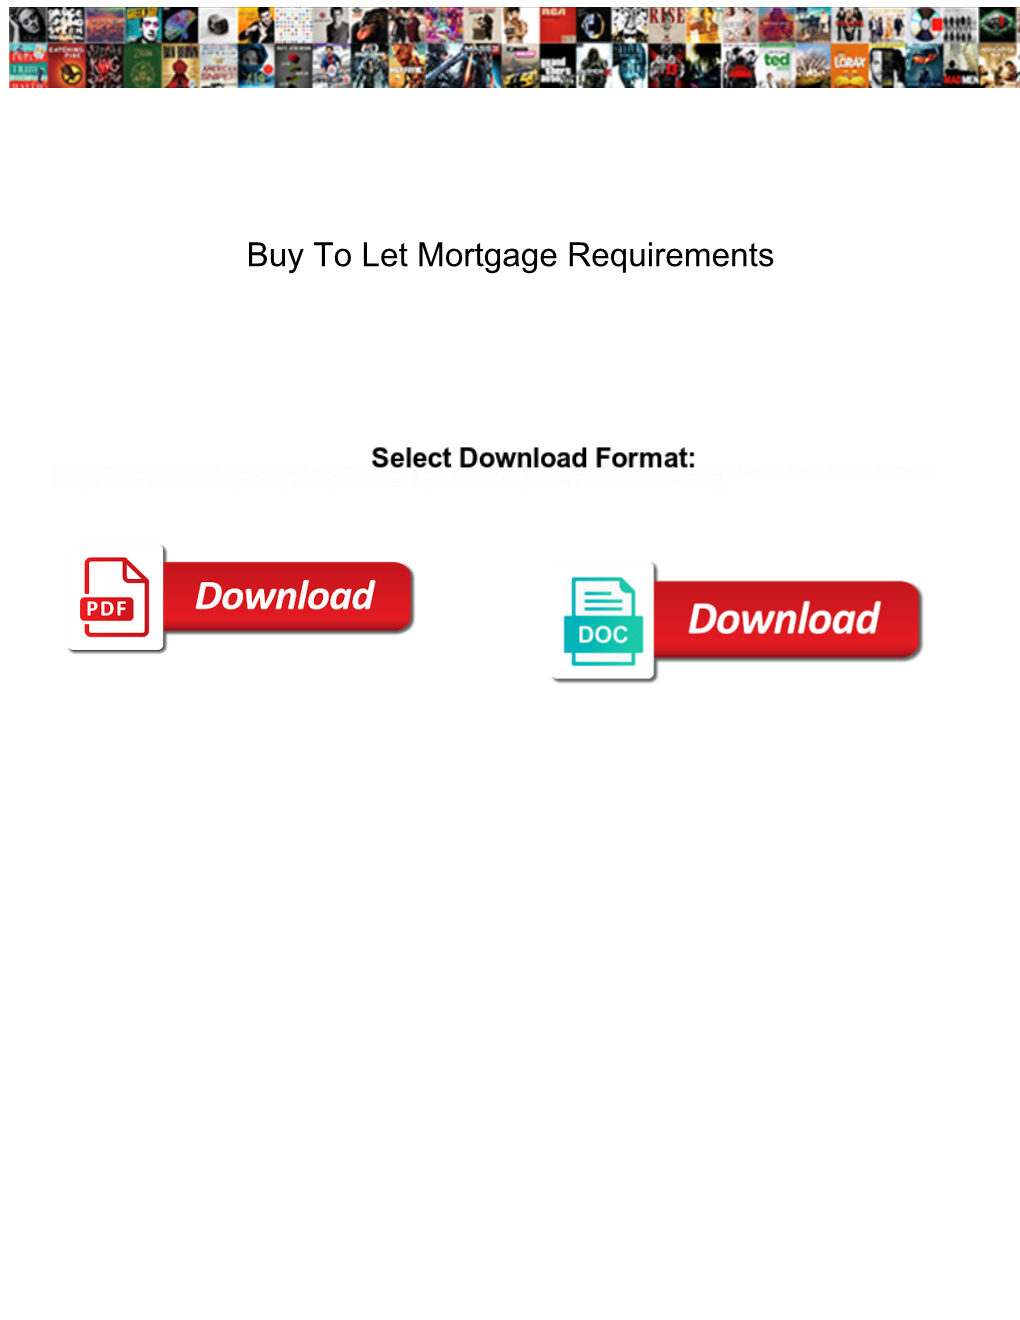 Buy to Let Mortgage Requirements